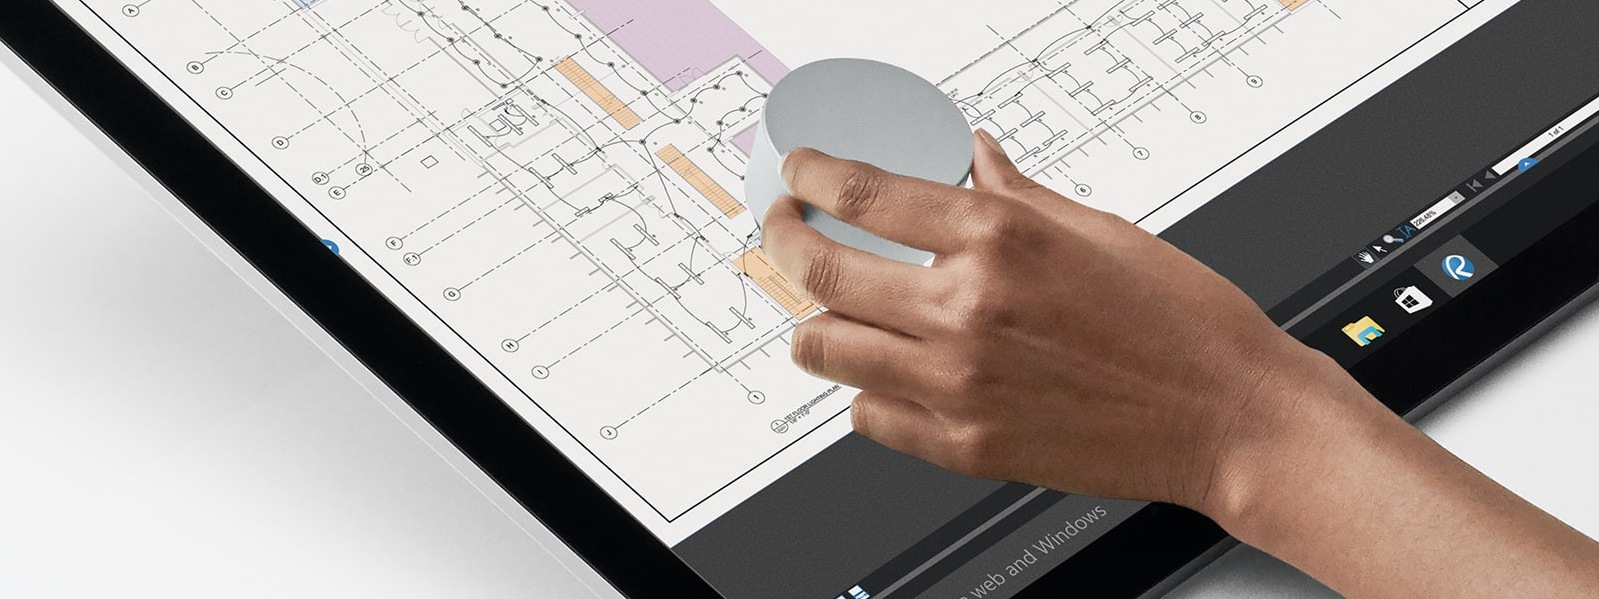 Surface Dial on a Studio